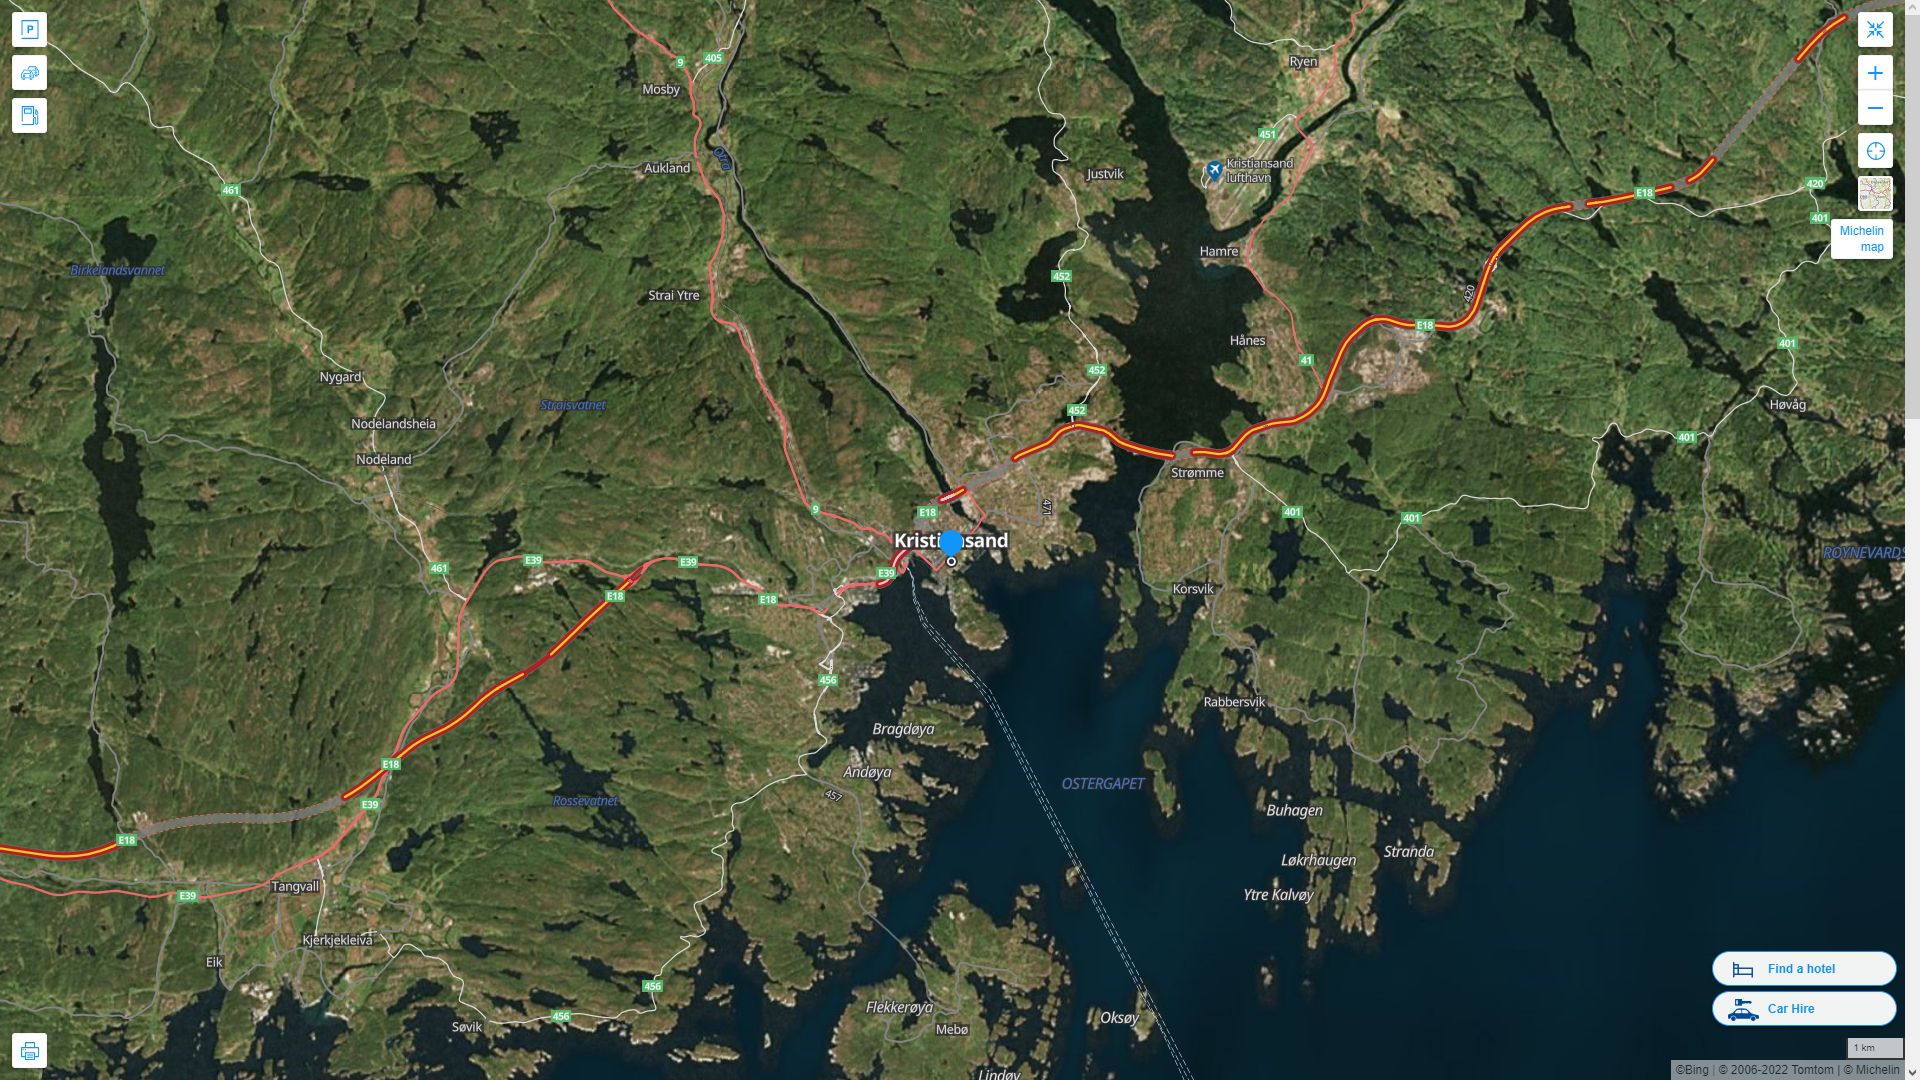 Kristiansand Highway and Road Map with Satellite View